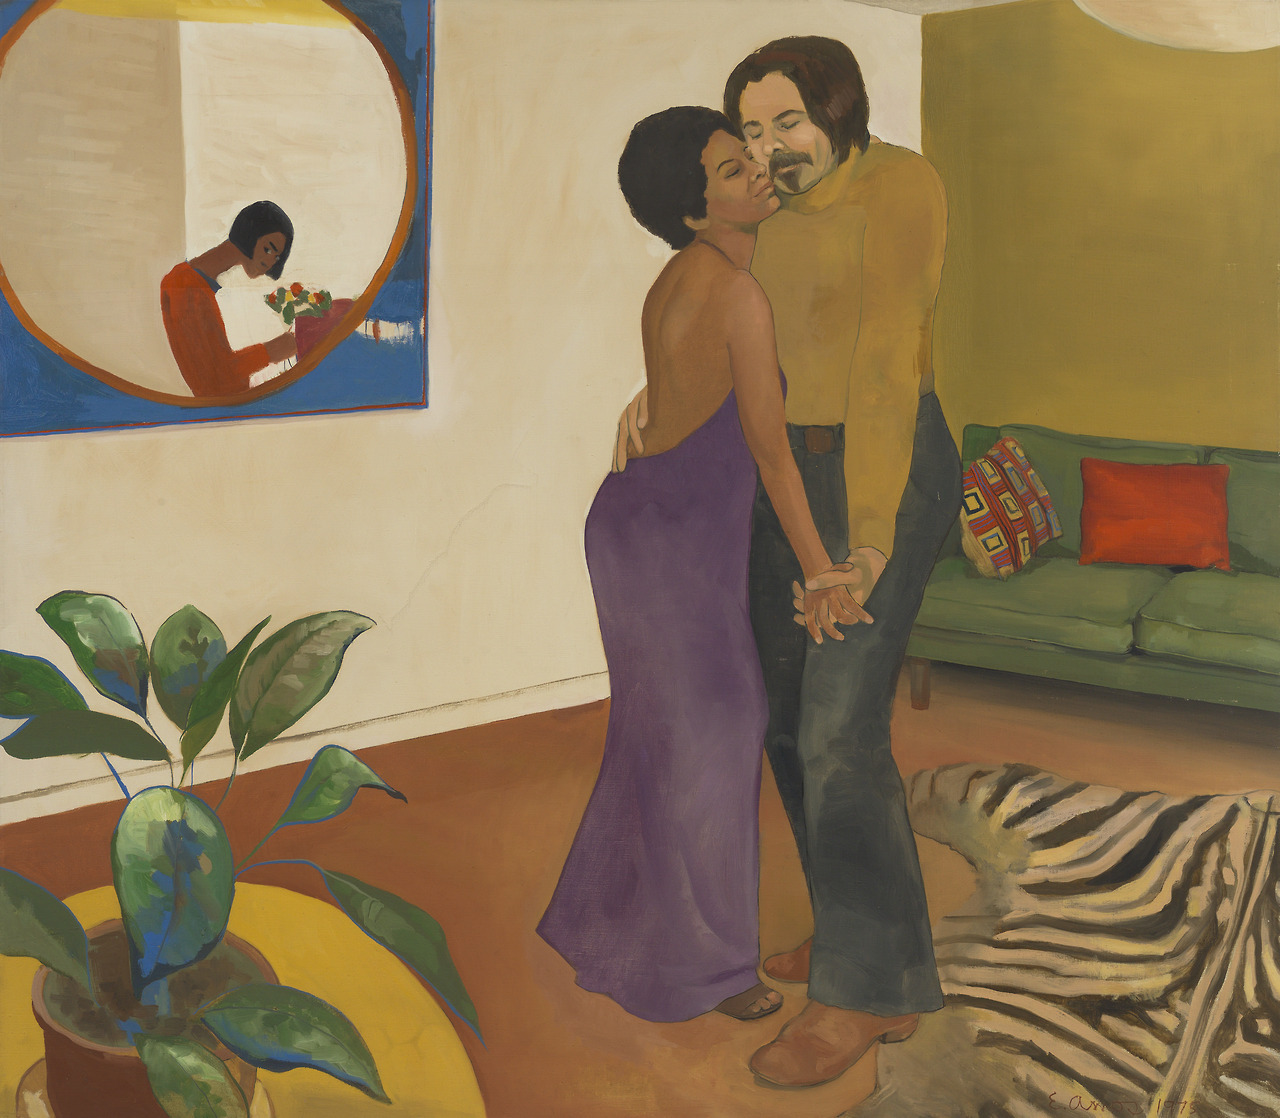 Sandy and Her Husband (1973), Emma Amos. Cleveland Museum of Art